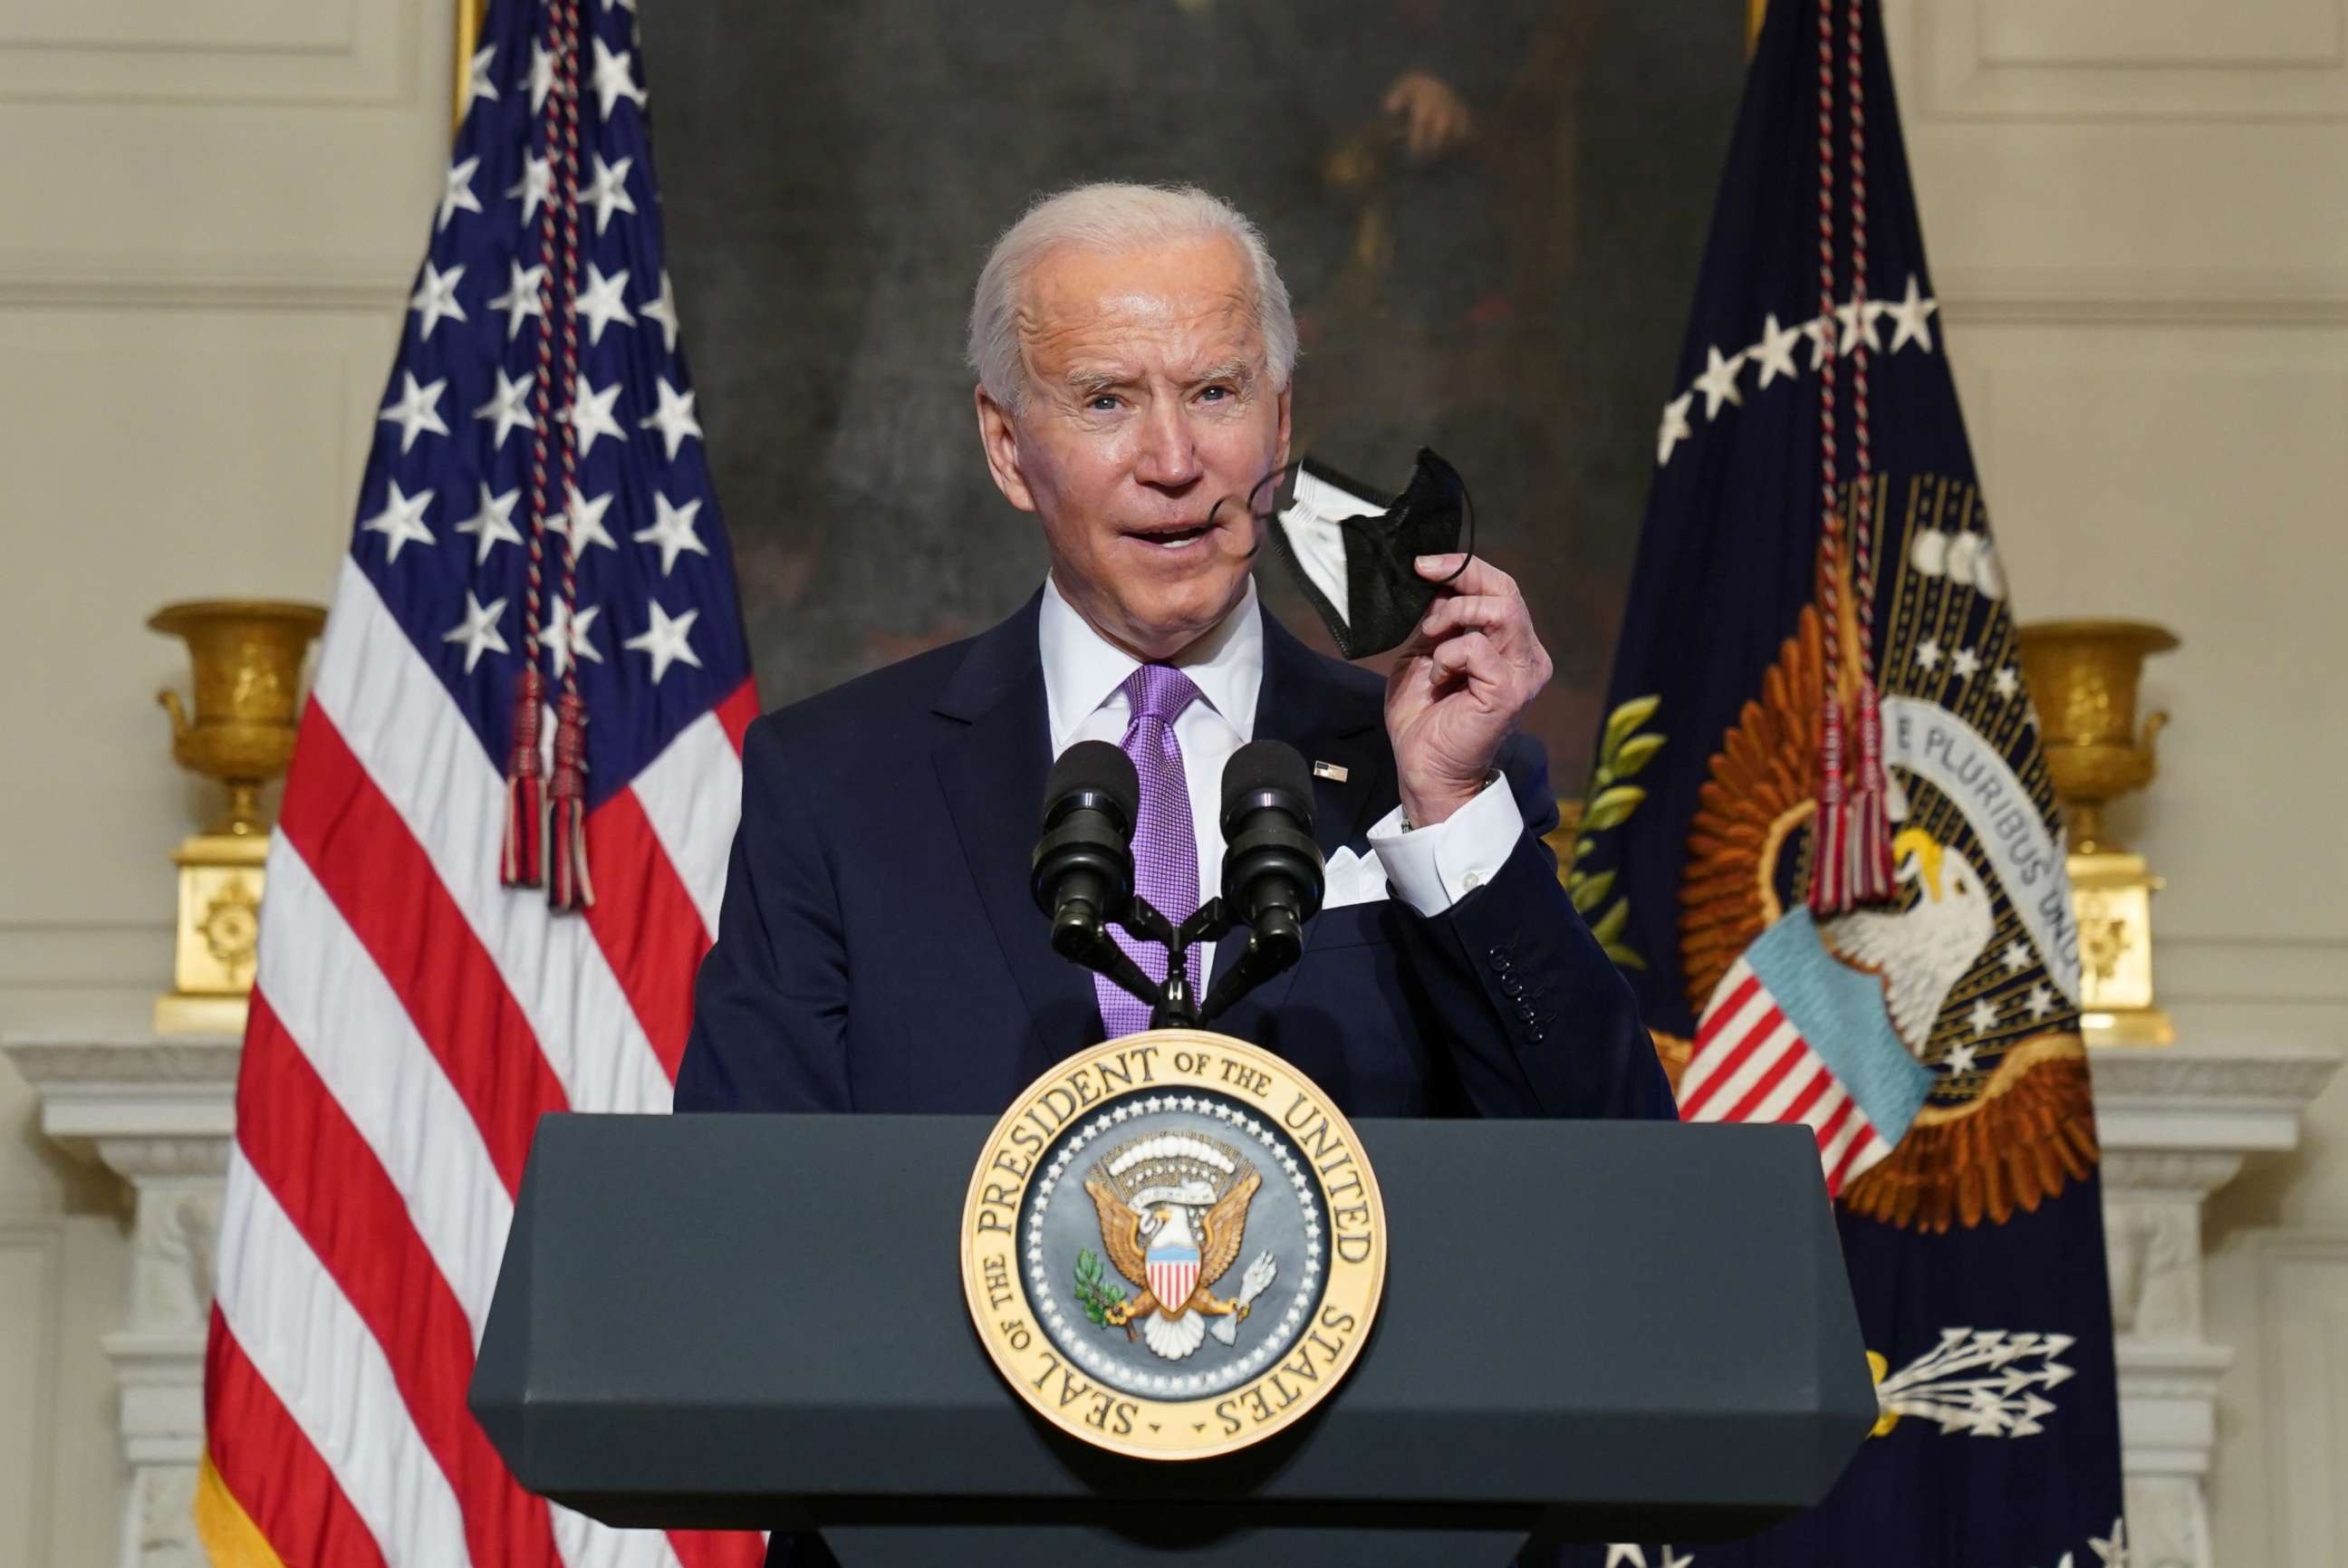 PHOTO: President Joe Biden holds up a face mask as he speaks about the fight to contain the coronavirus disease (COVID-19) pandemic, at the White House in Washington, Jan. 26, 2021.